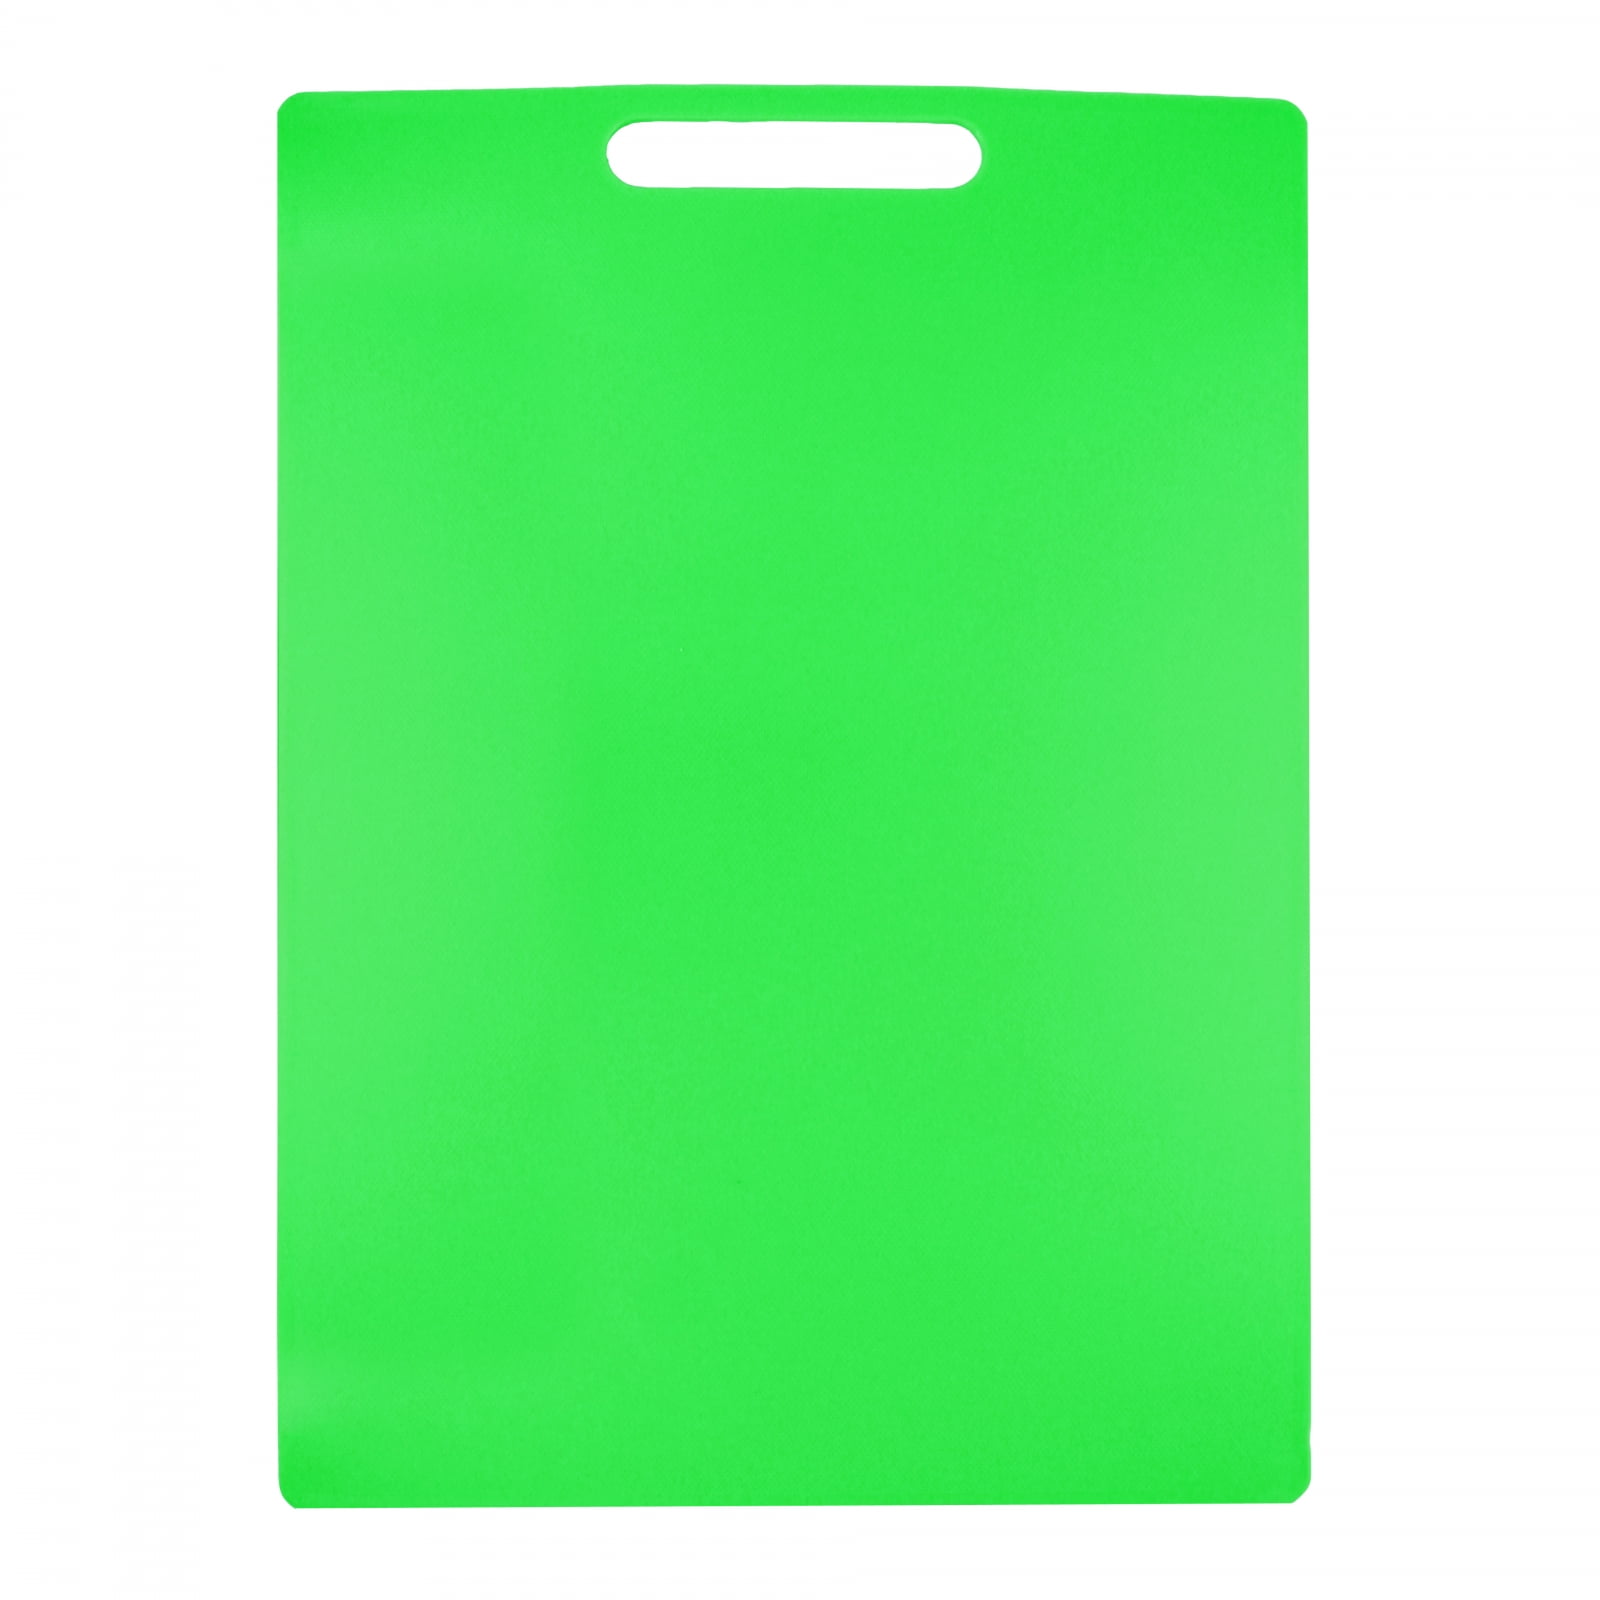 Home Essentials Kitchen Cutting Board 10.8 x 15 inch Countertop Protector Green